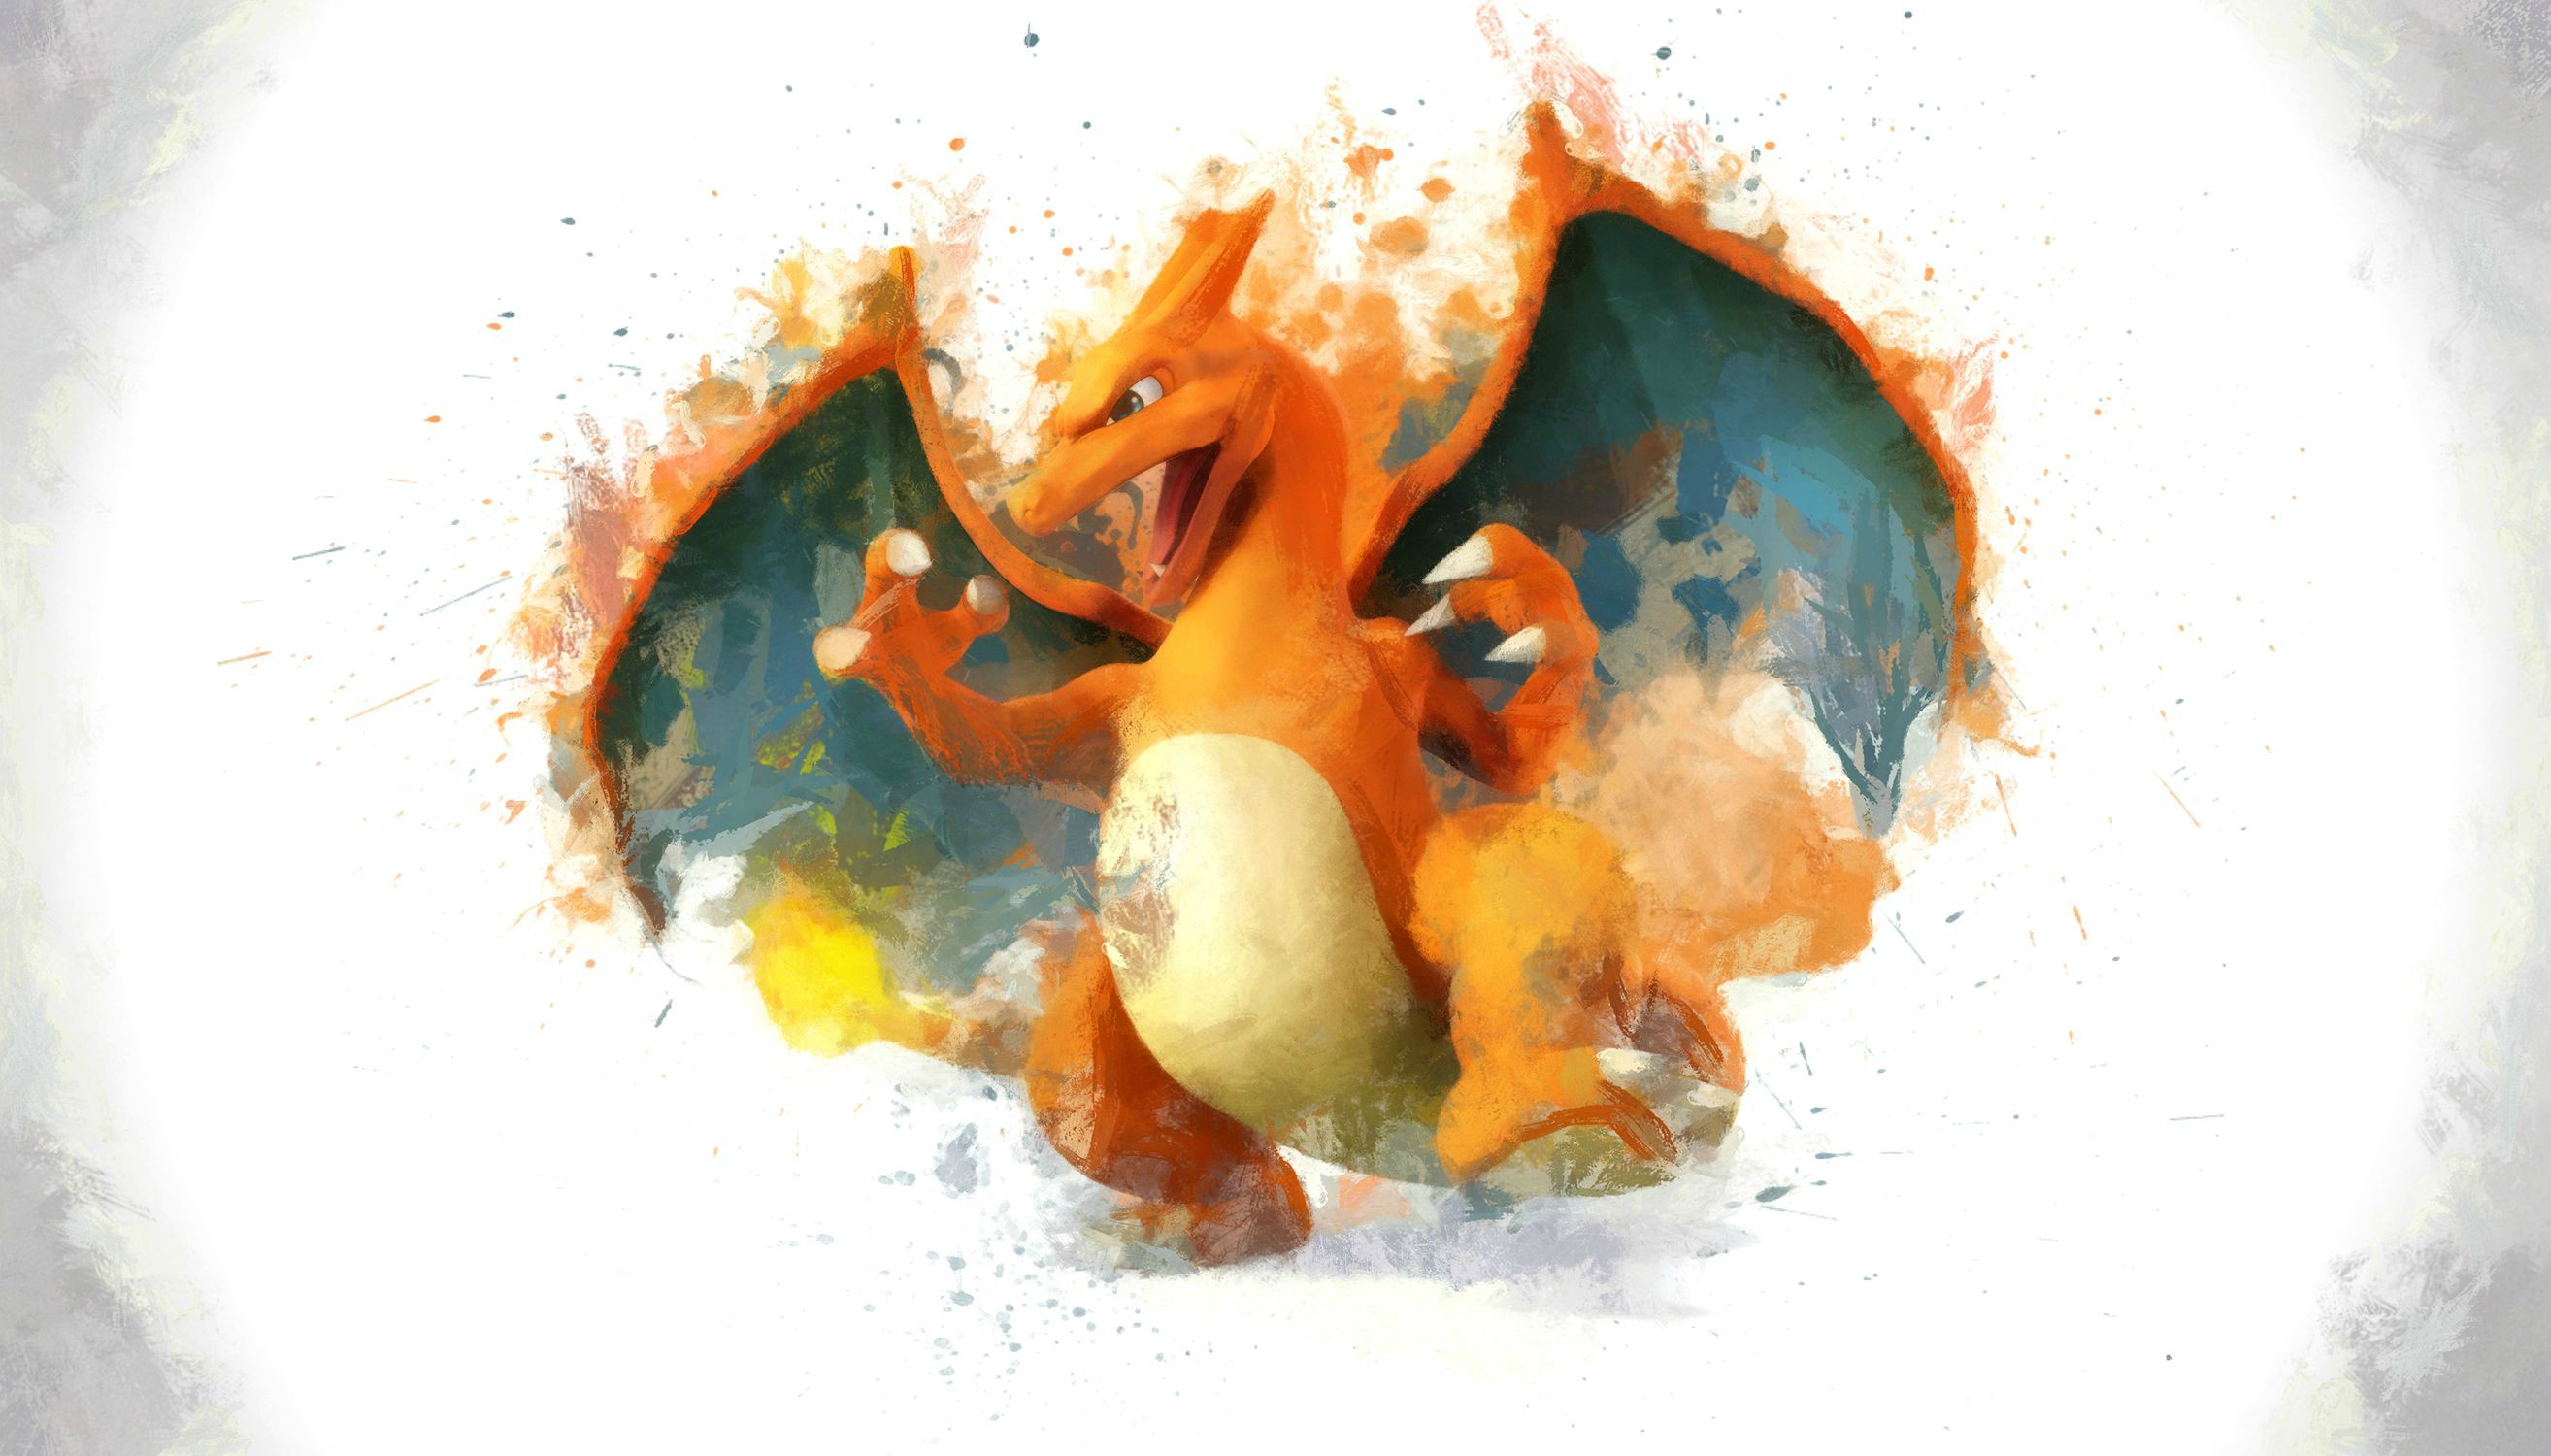 100+] Epic Charizard Wallpapers | Wallpapers.com